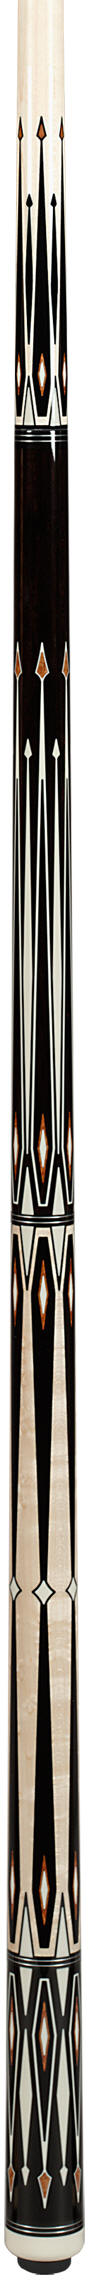 Pechauer Camelot II Pool Cue - Winchester